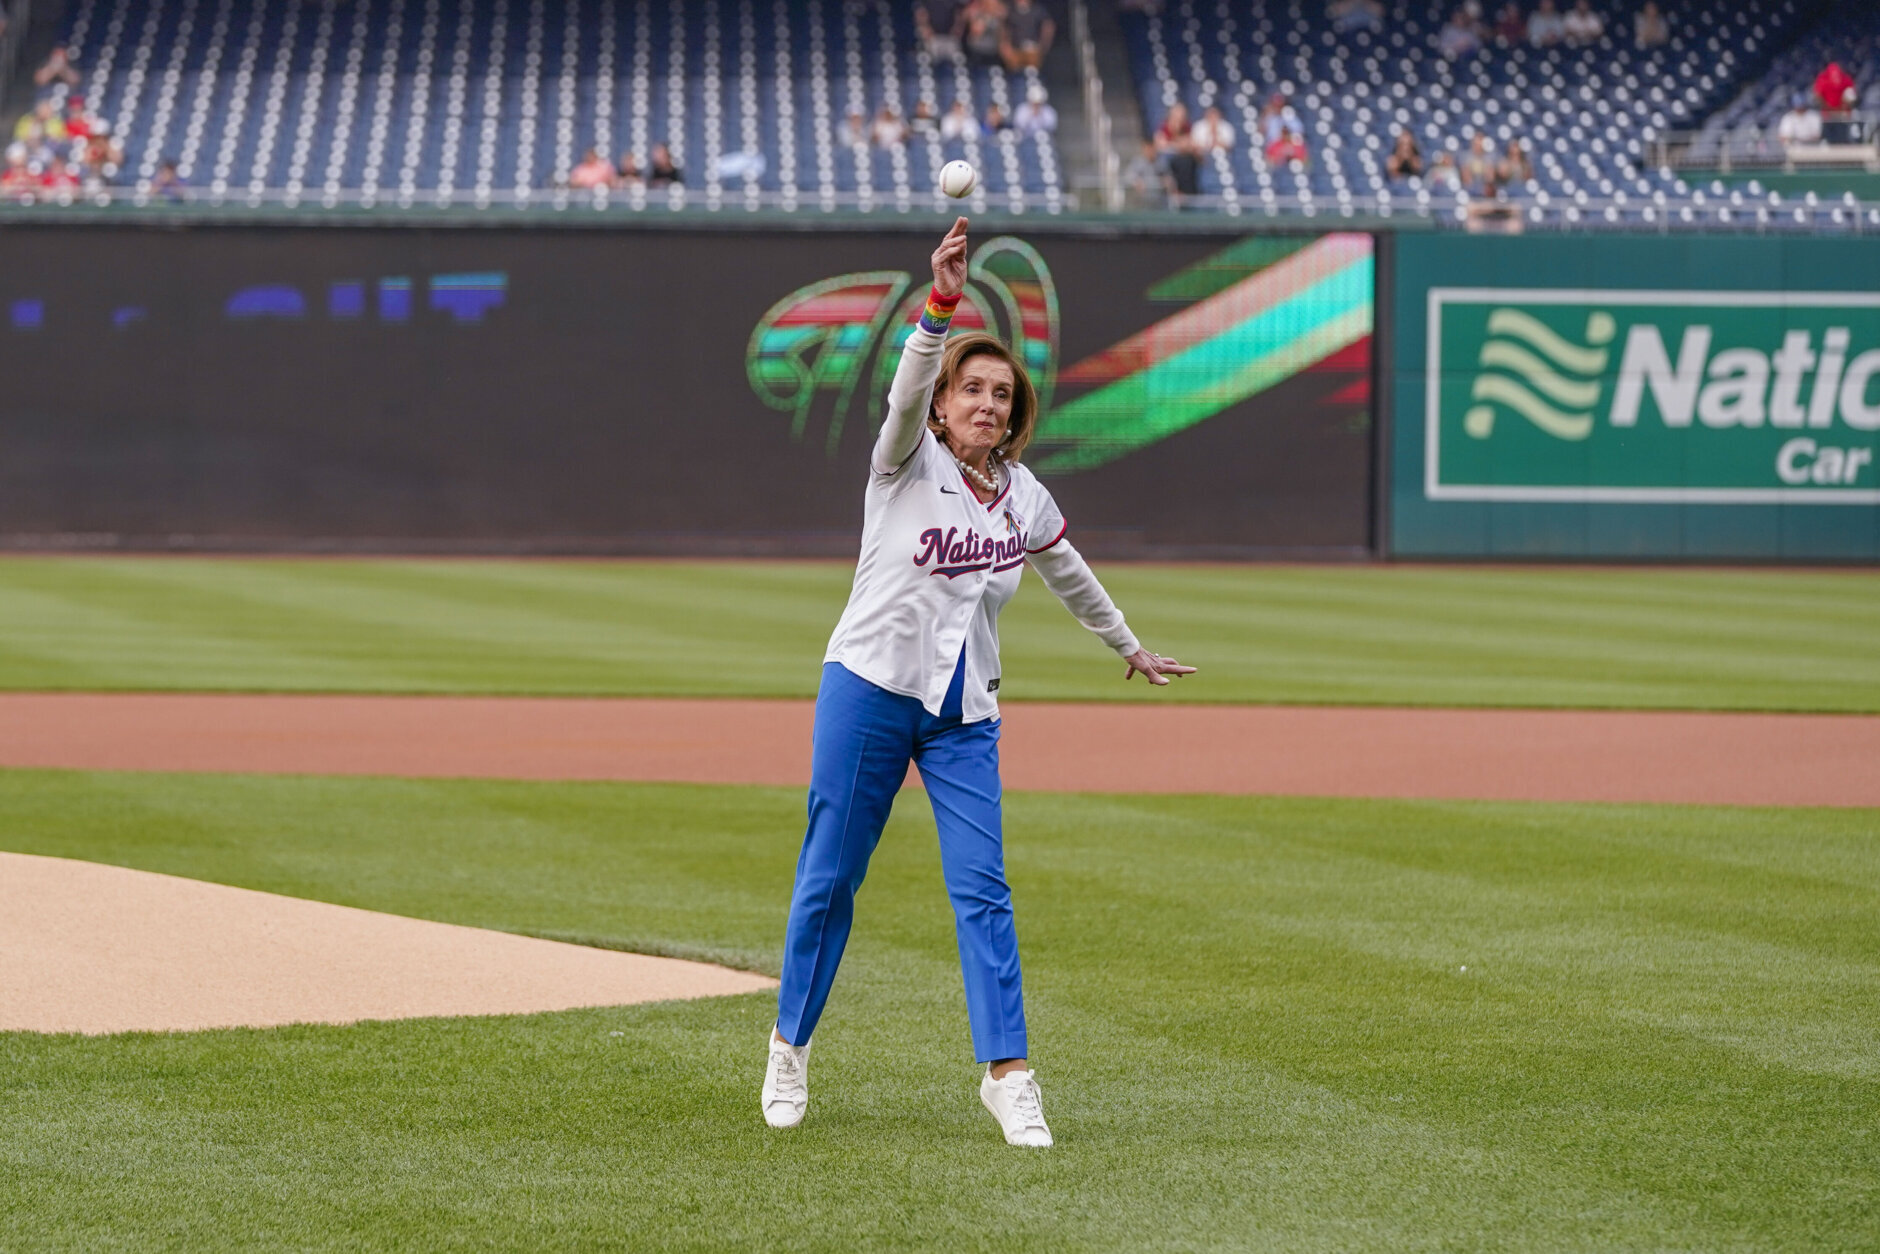 Rep. Nancy Pelosi, D-Calif., throws out a ceremonial first pitch before a baseball game between the Washington Nationals and the Arizona Diamondbacks at Nationals Park, Tuesday, June 6, 2023, in Washington. The Nationals celebrated Pride month with their 18th Night OUT event. (AP Photo/Alex Brandon)